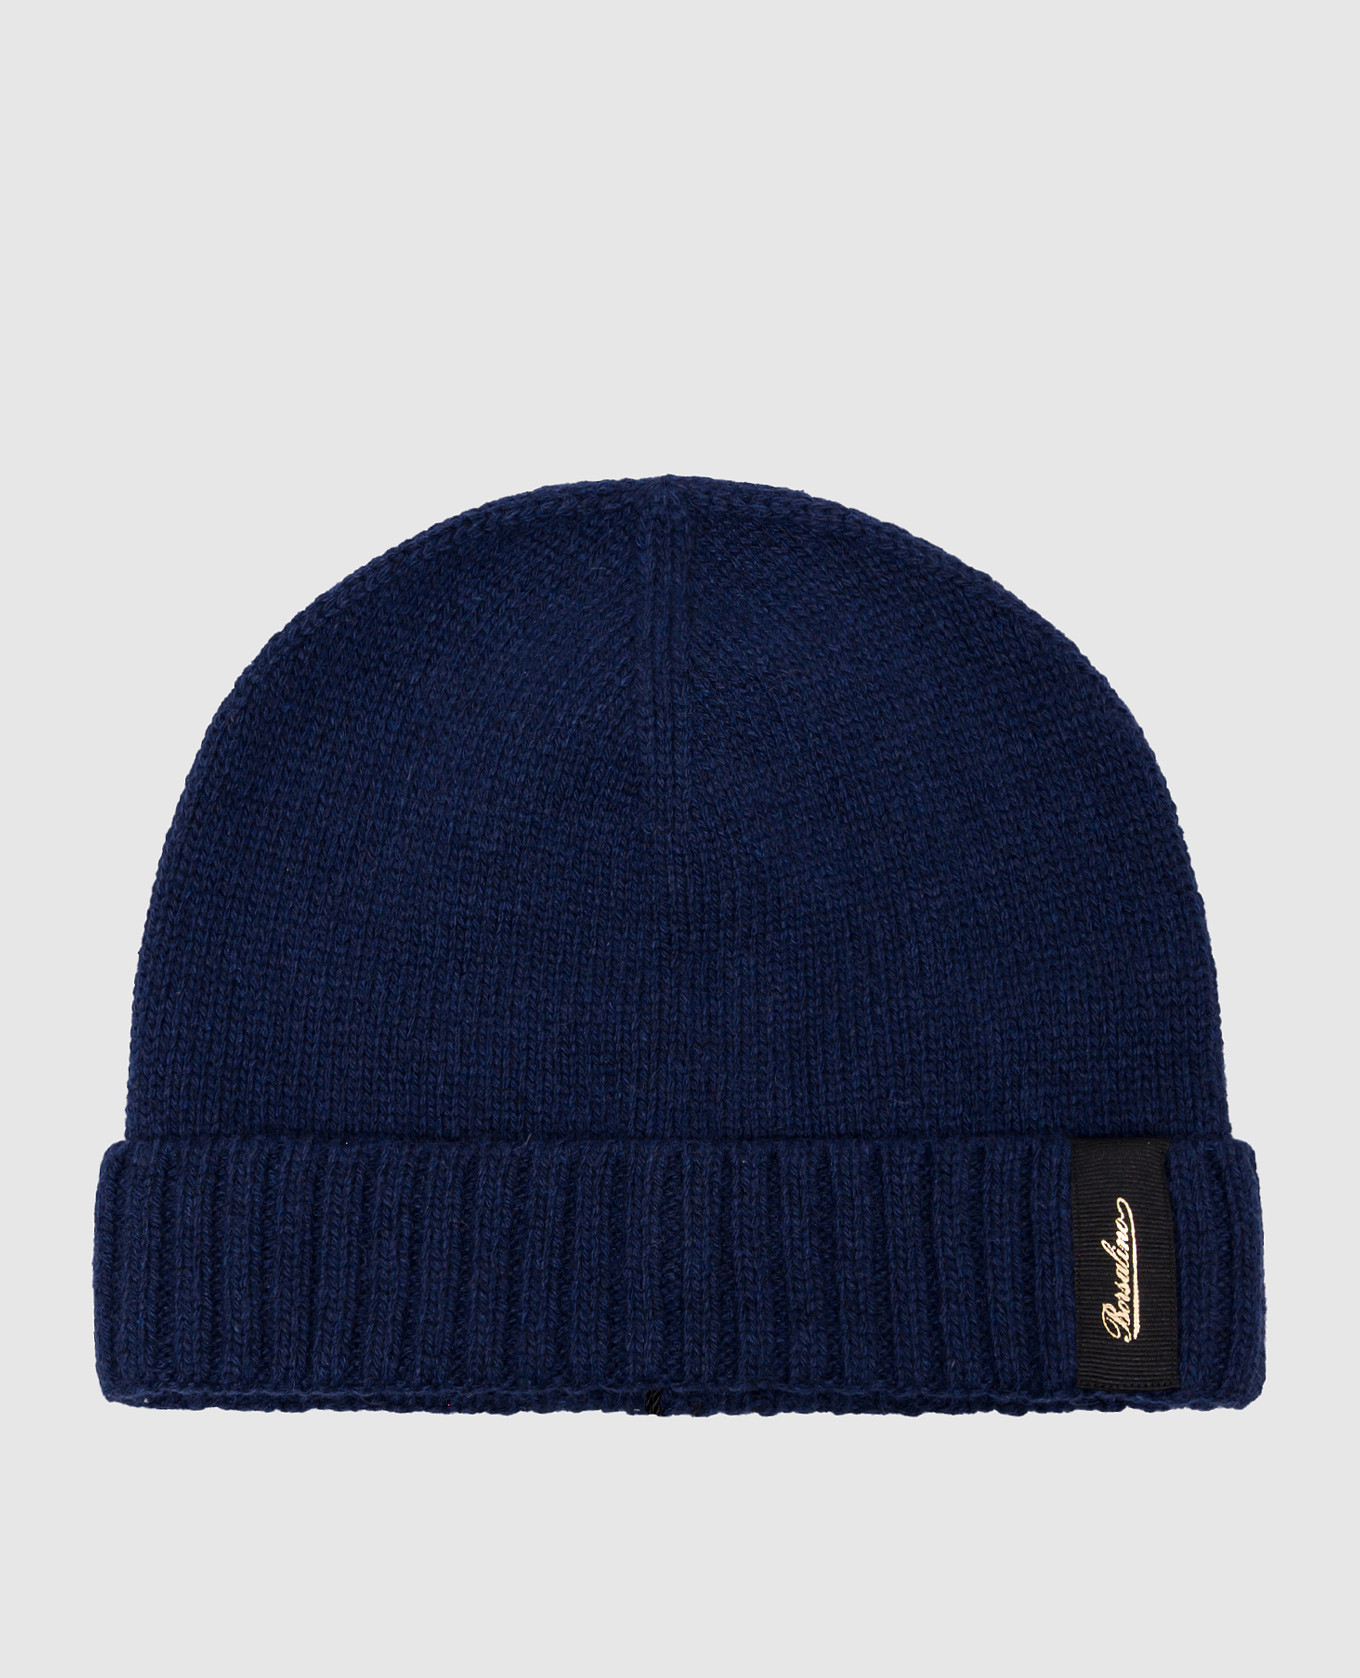 Blue cashmere hat with logo